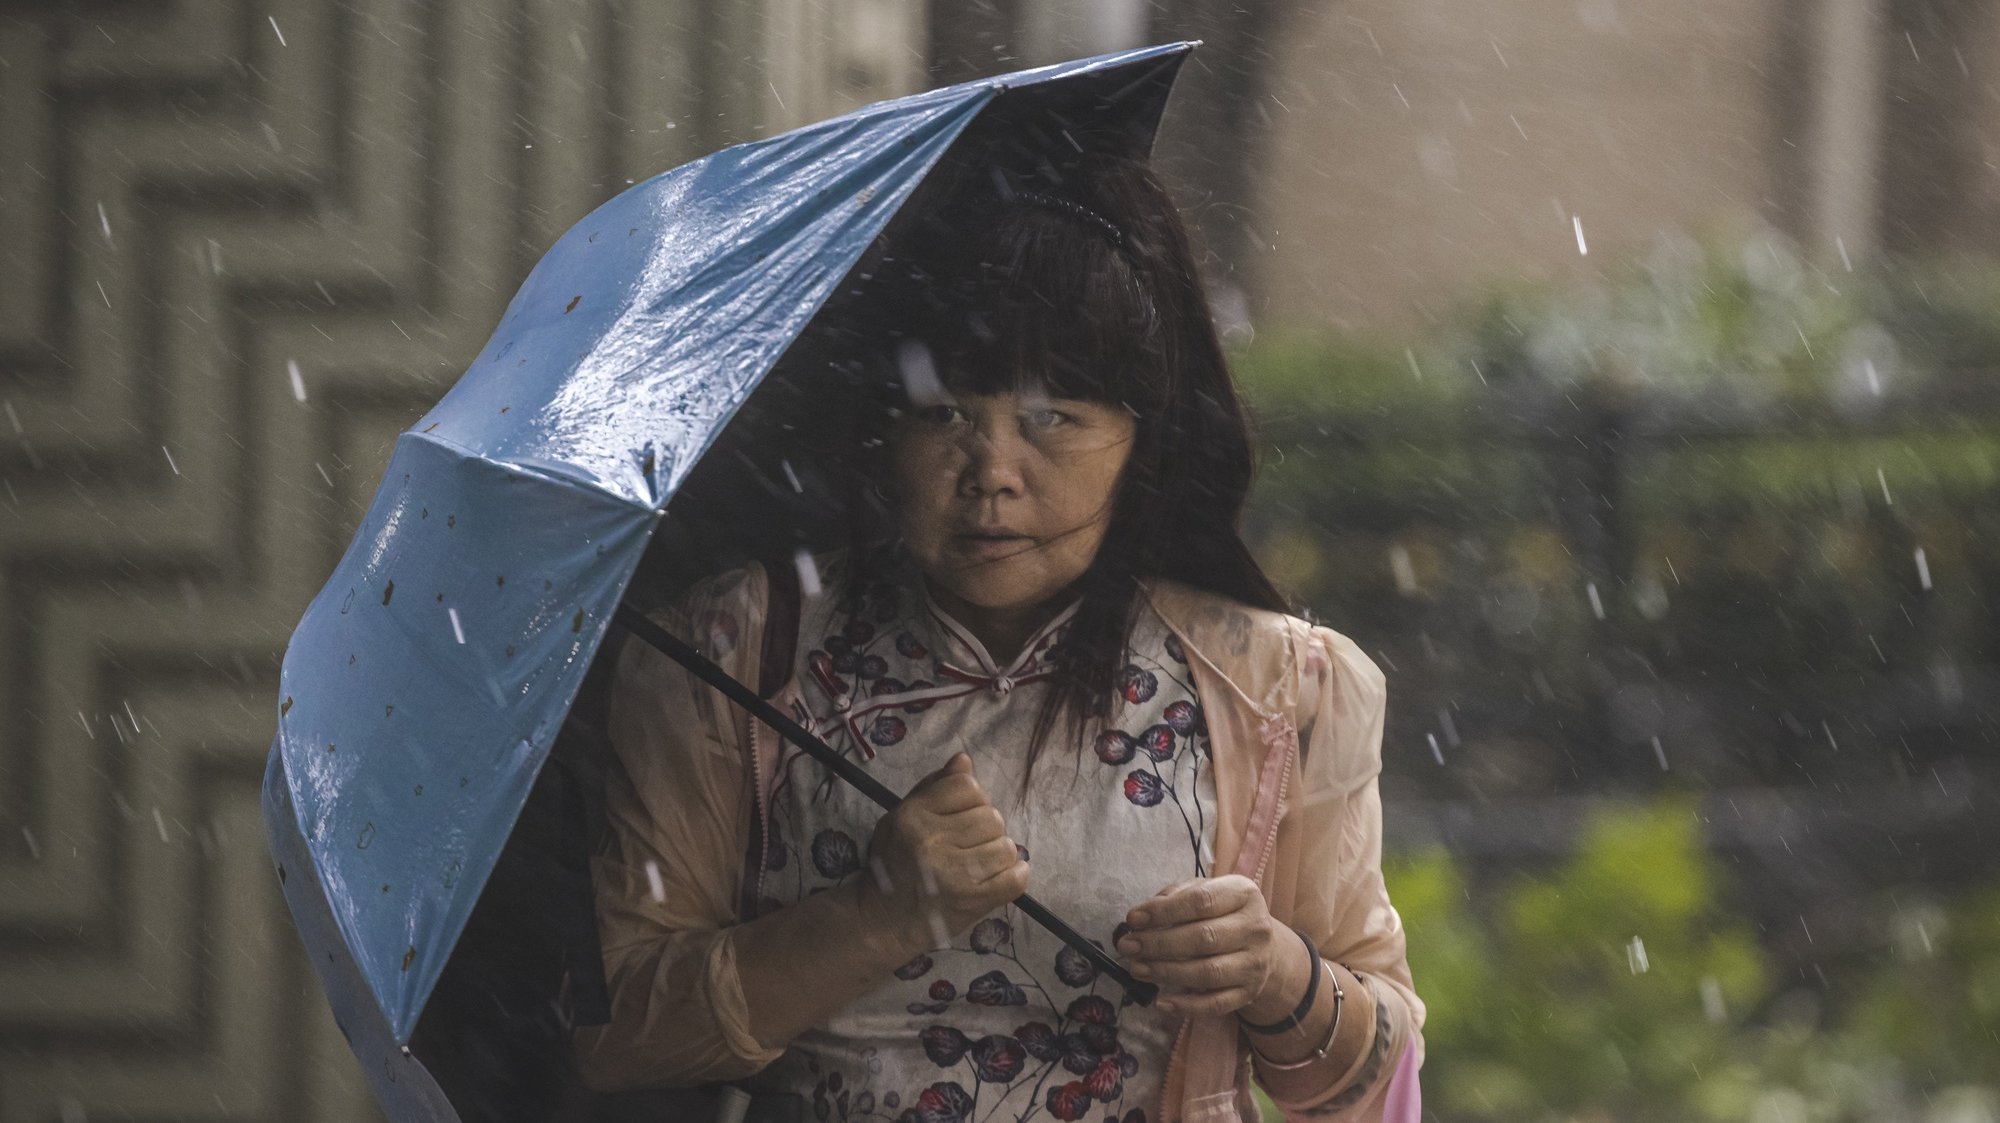 epa09364992 A woman walks on the street during the heavy winds and rain caused by “In-Fa” typhoon in Shanghai, China, 25 July 2021. After the typhoon Cempaka hit South China on 20 July and heavy rain in Central China causing flooding on 21 July, Shanghai braces for the typhoon In-Fa. According to a China Meteorological Administration report, In-Fa landed 25 July, at 12:30 pm local time, in Zhoushan city, a major port in East China. 25 July, Shanghai airports suspended all flights as well as inter-city trains and busses. The Shanghai government said it would slow subway trains and advised the public to stay indoors.  EPA/ALEX PLAVEVSKI